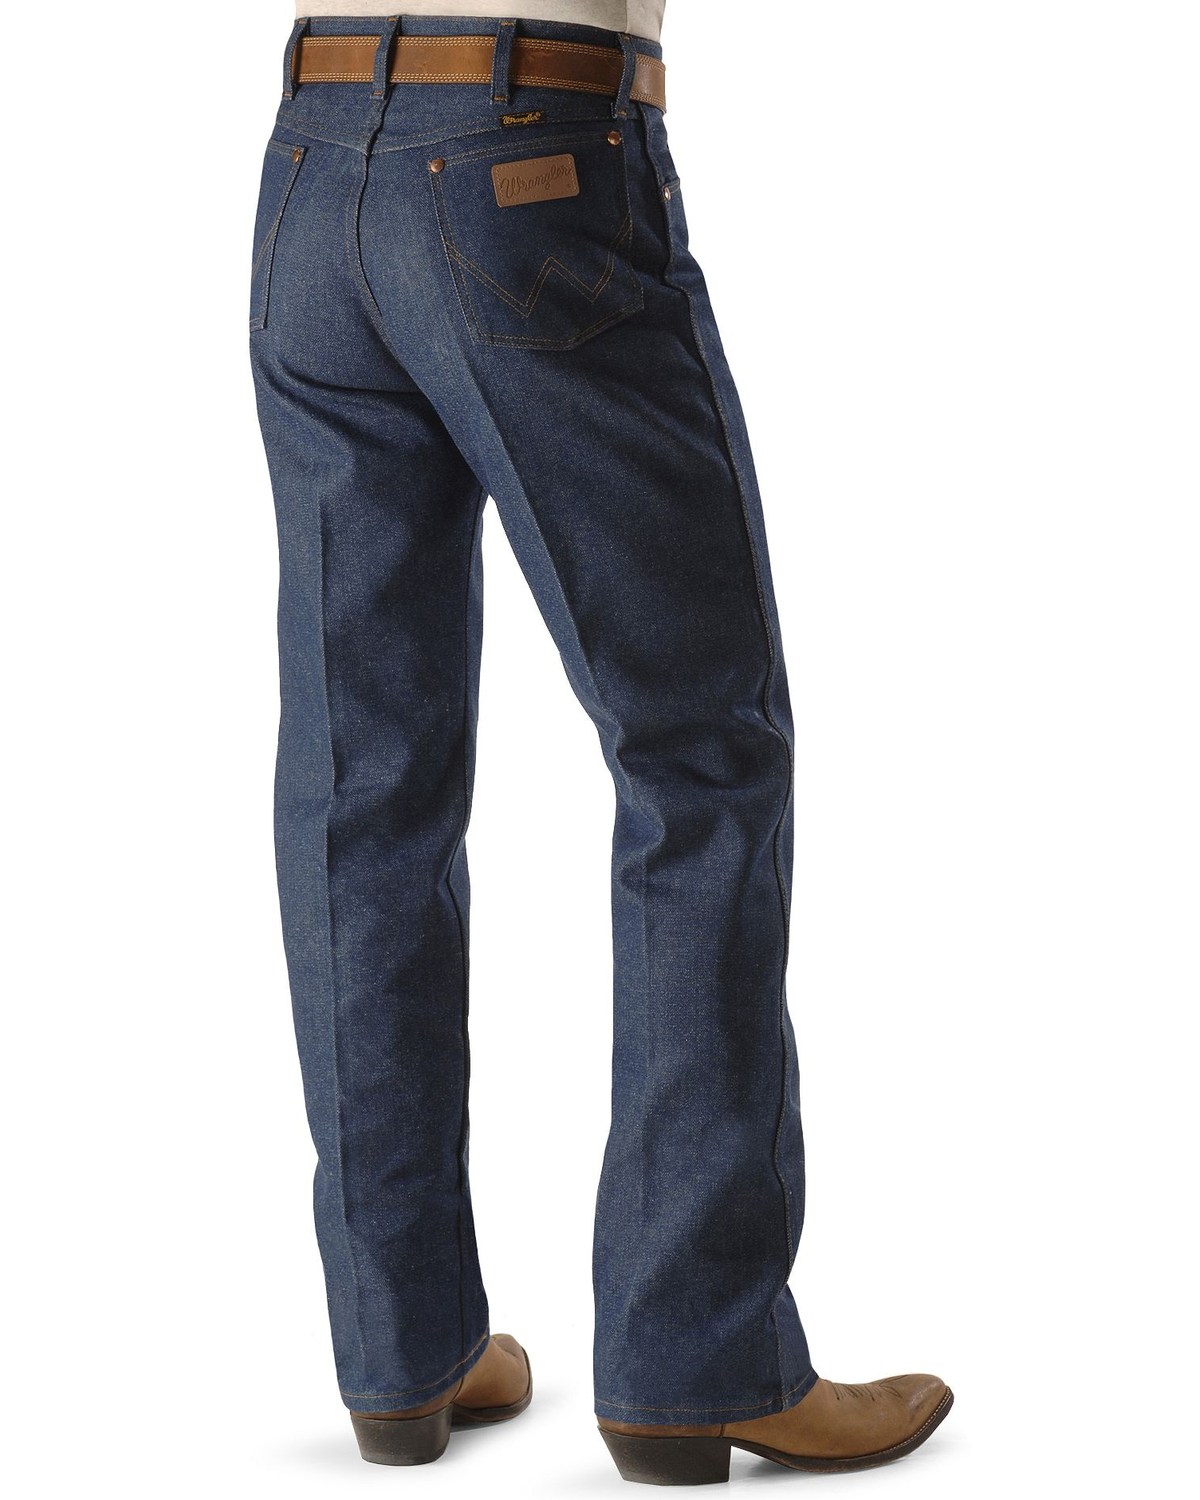 12 inch rise jeans